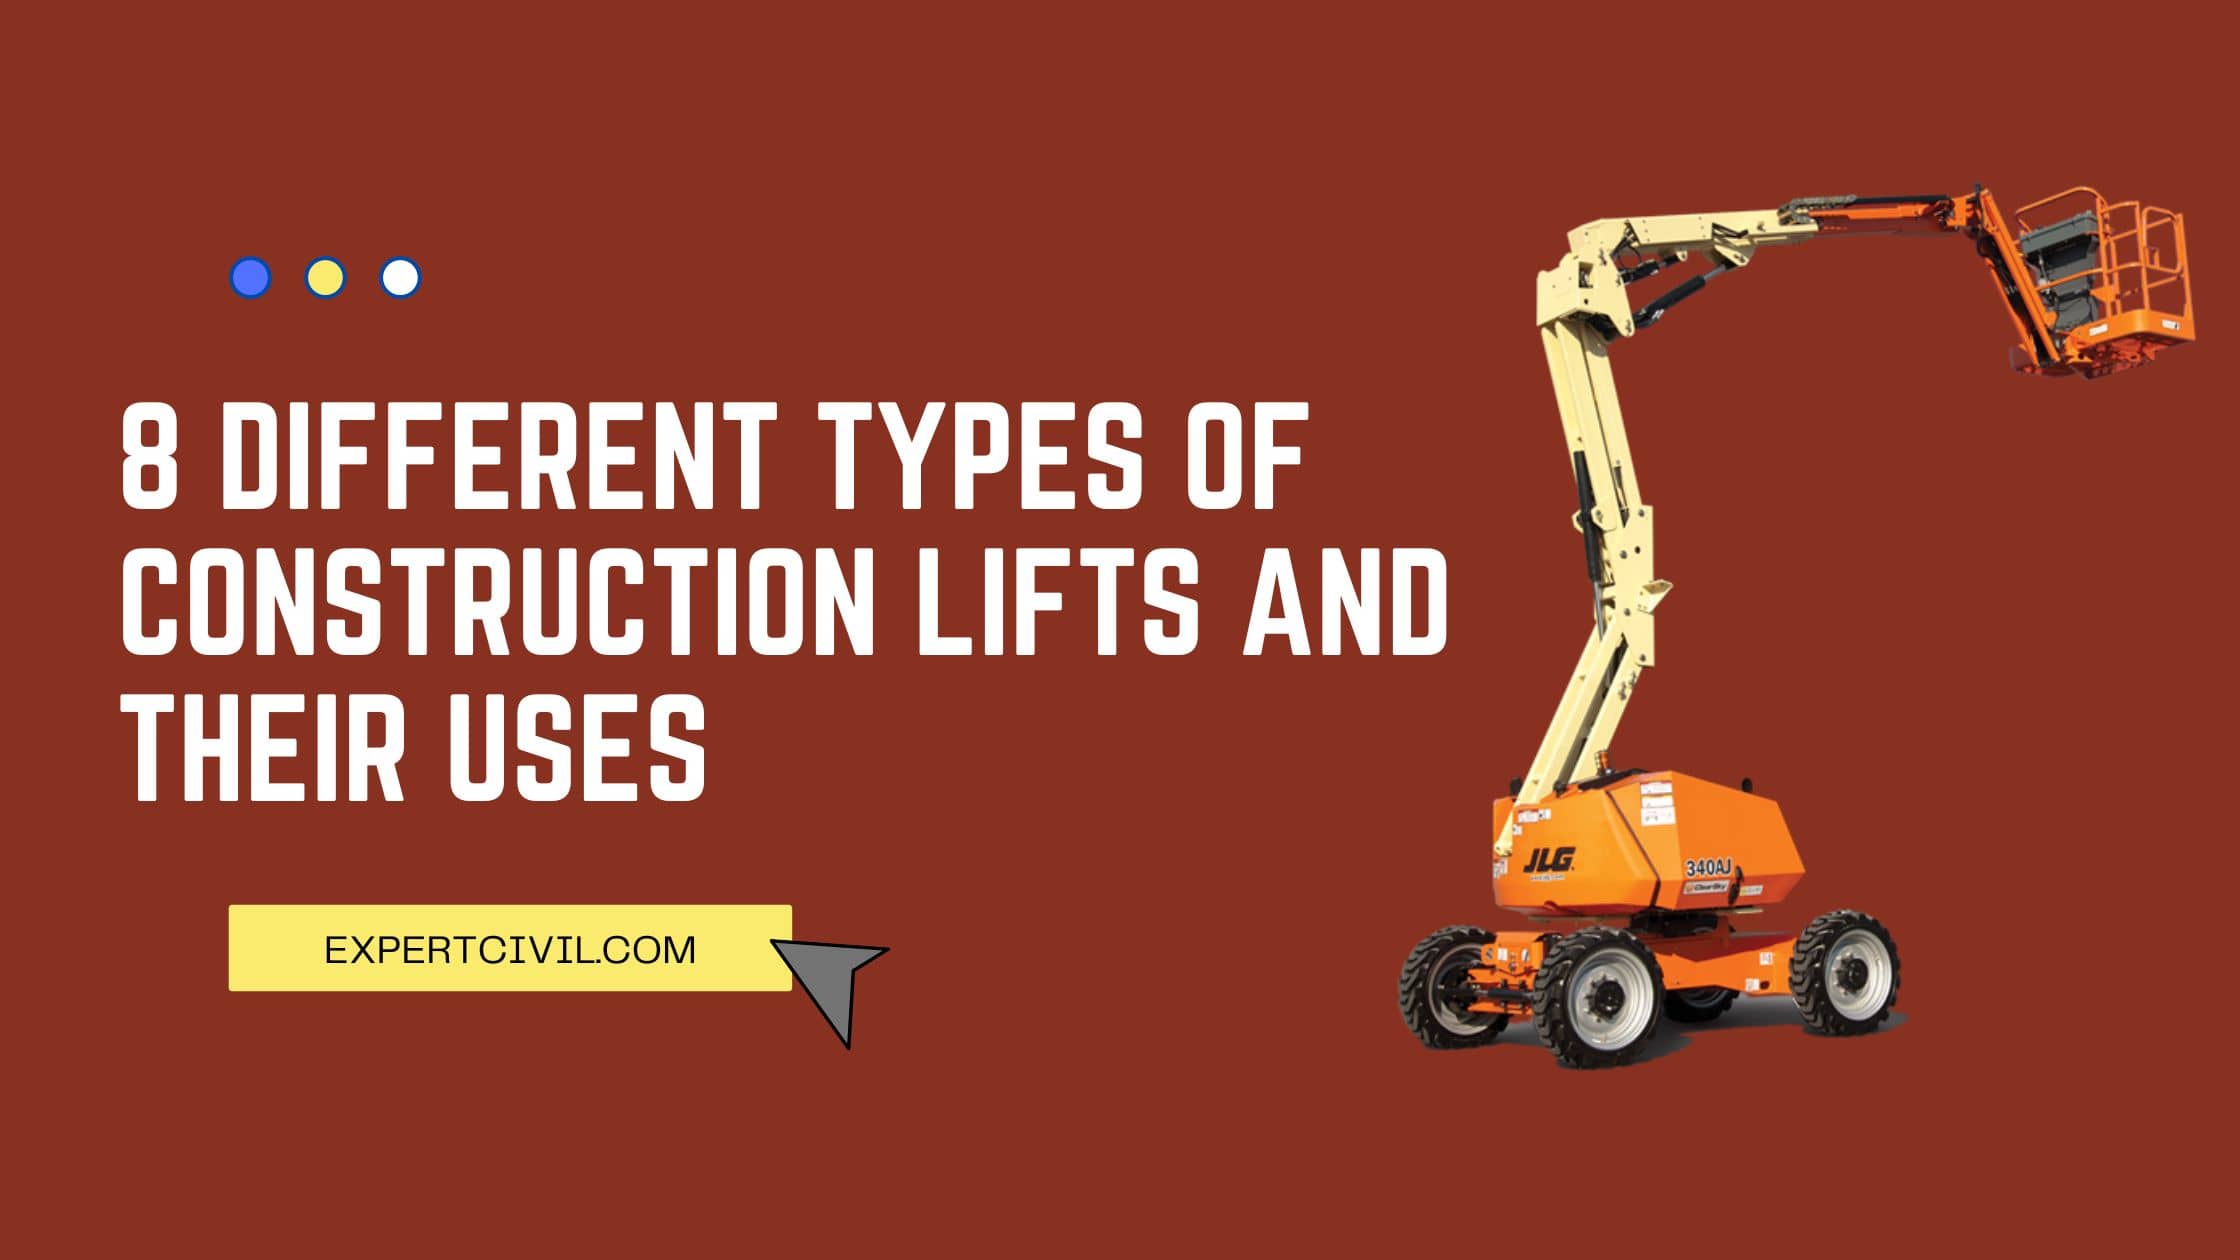 8 Different Types of Construction Lifts For Construction